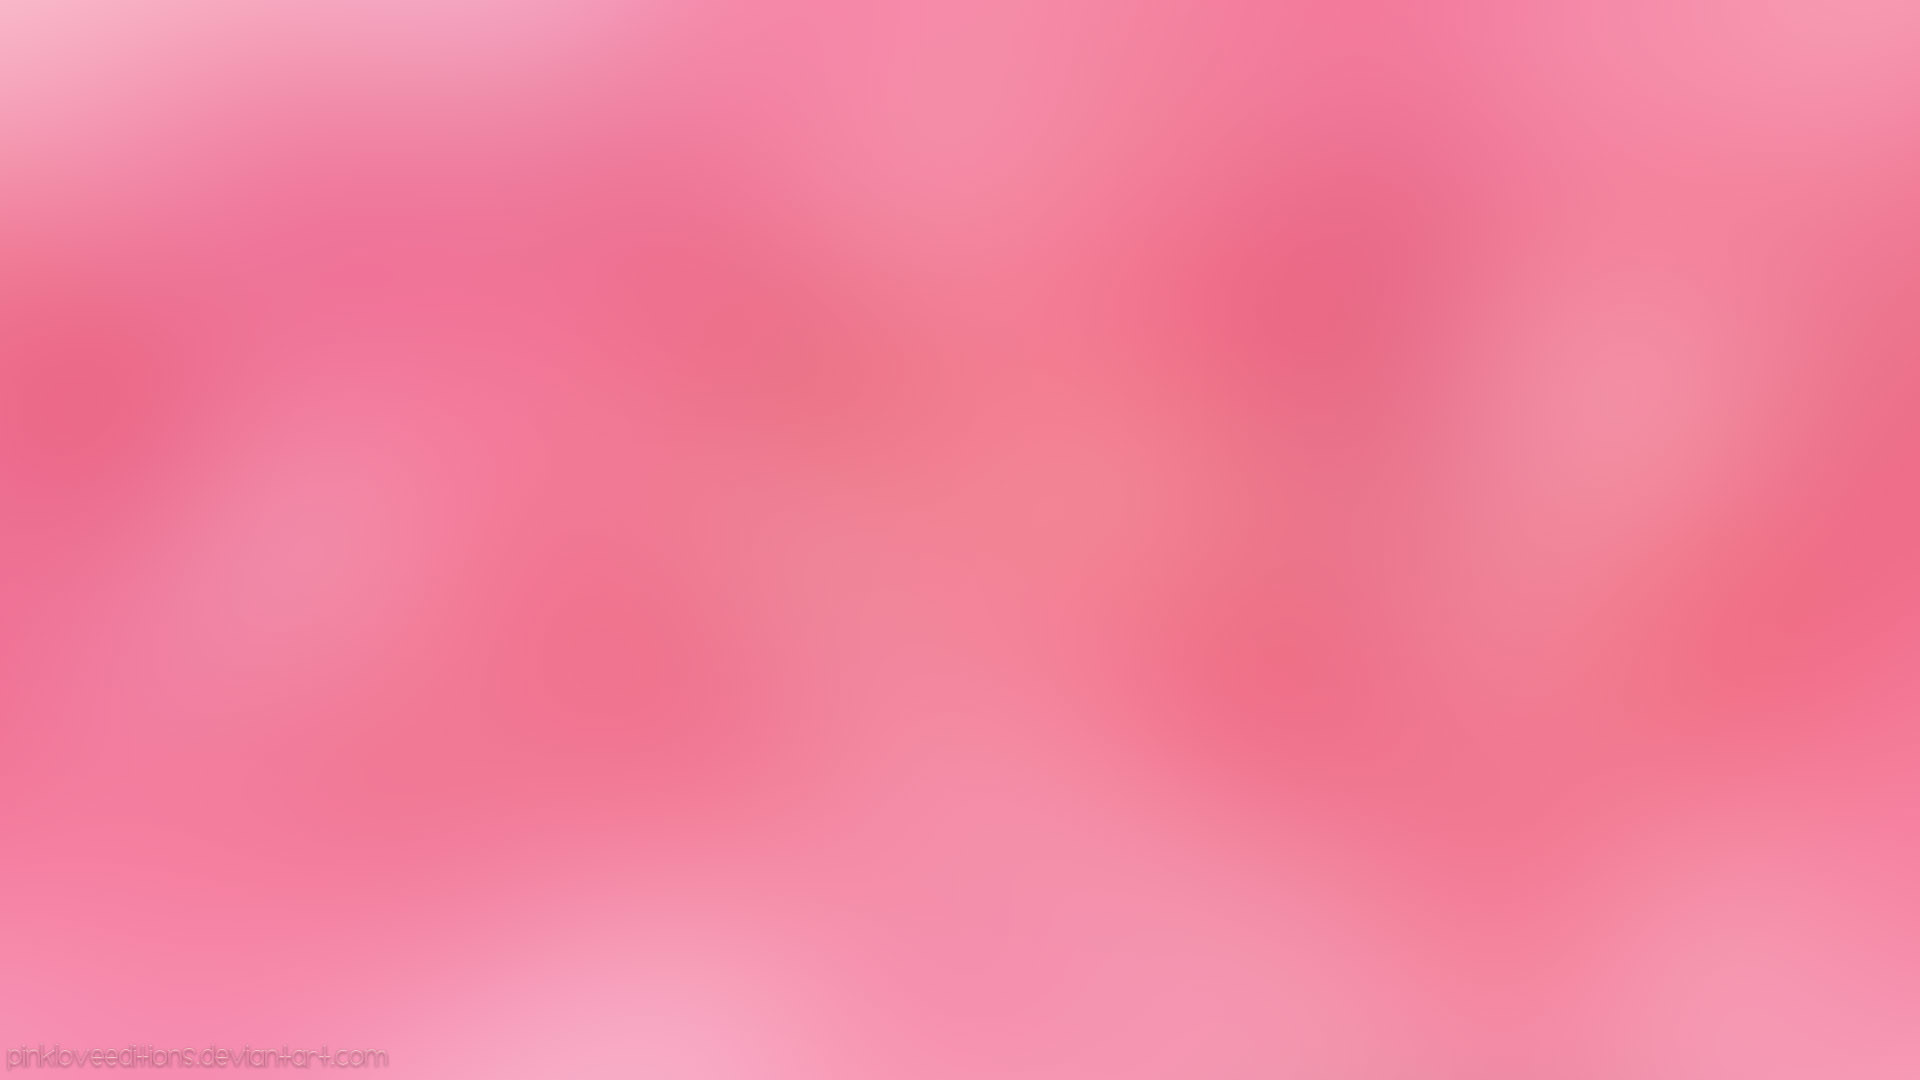 1920x1080 Pink Abstract Wallpaper by PinkLoveEditions Pink Abstract Wallpaper by  PinkLoveEditions